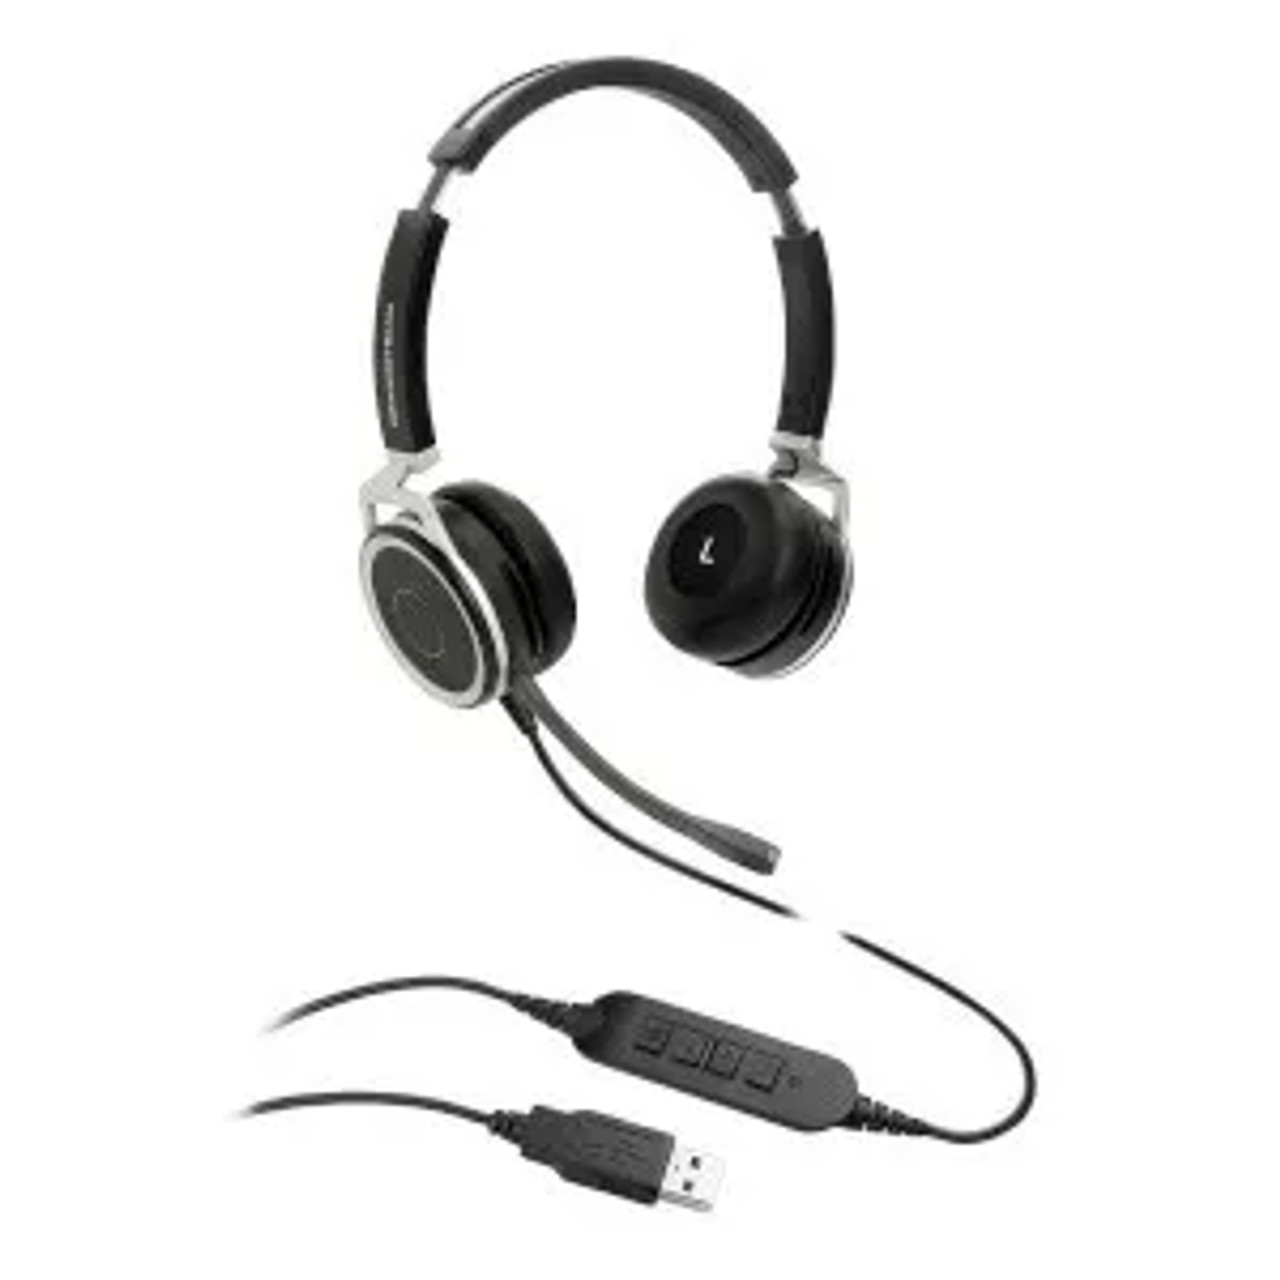 Grandstream Networks GUV3005 Noise Cancelling USB Headset w/Busy